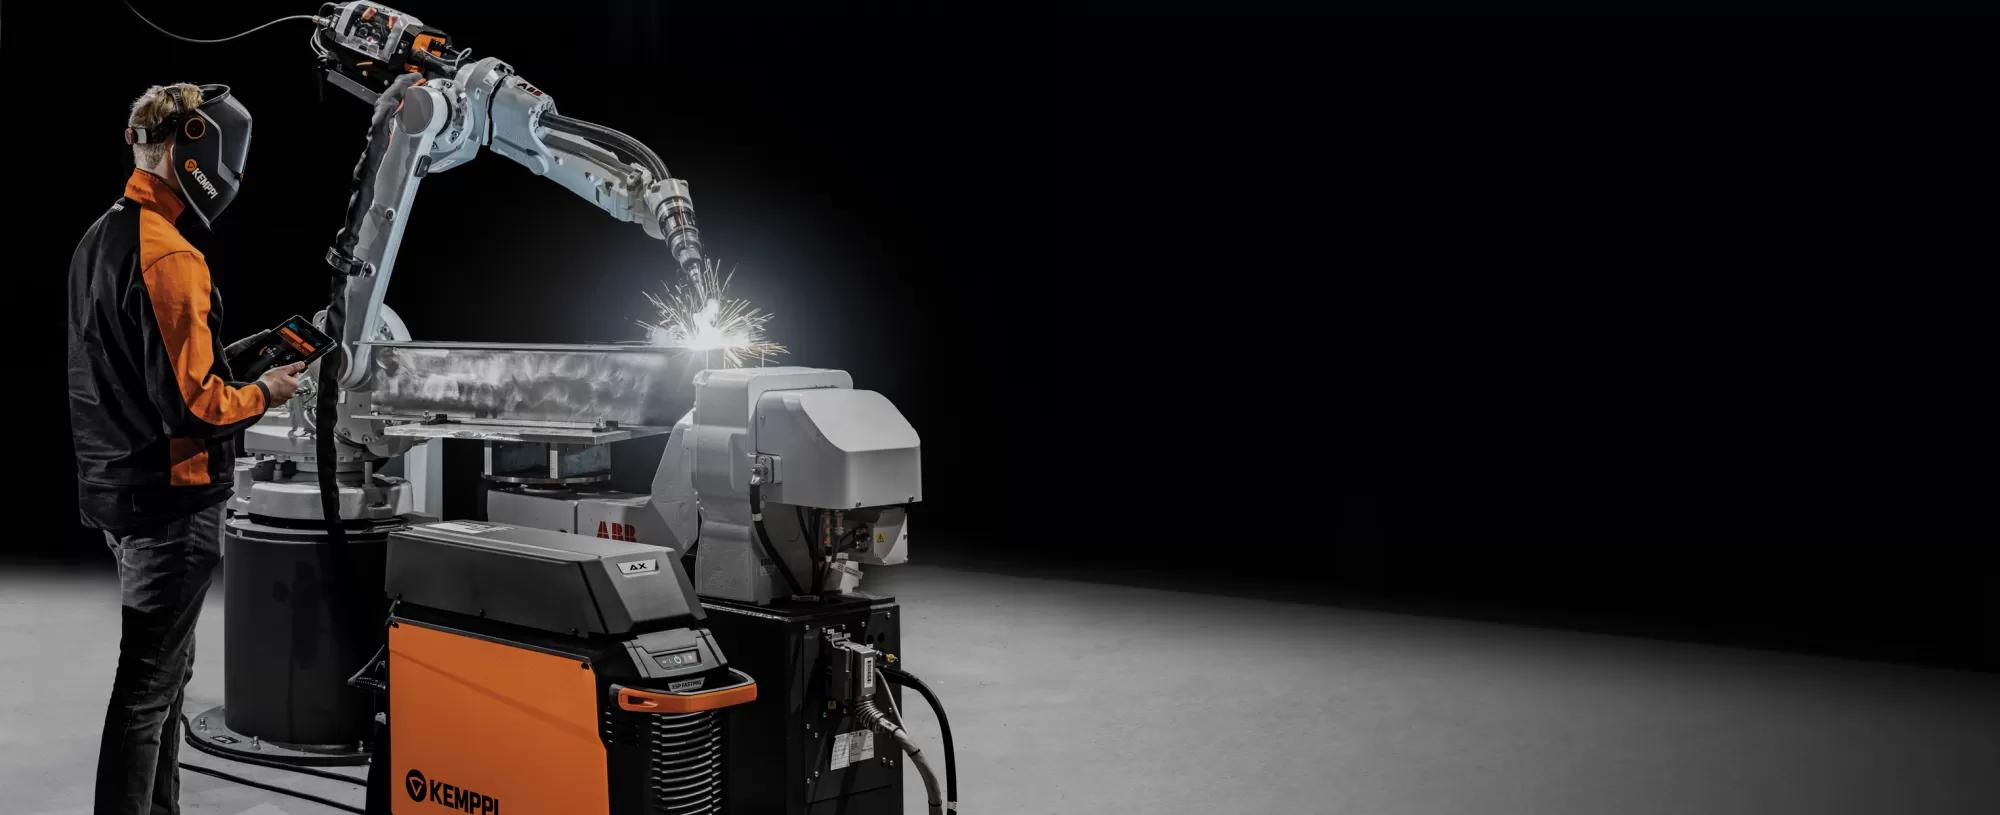 Product Kemppi solutions for robotic welding - Kemppi image